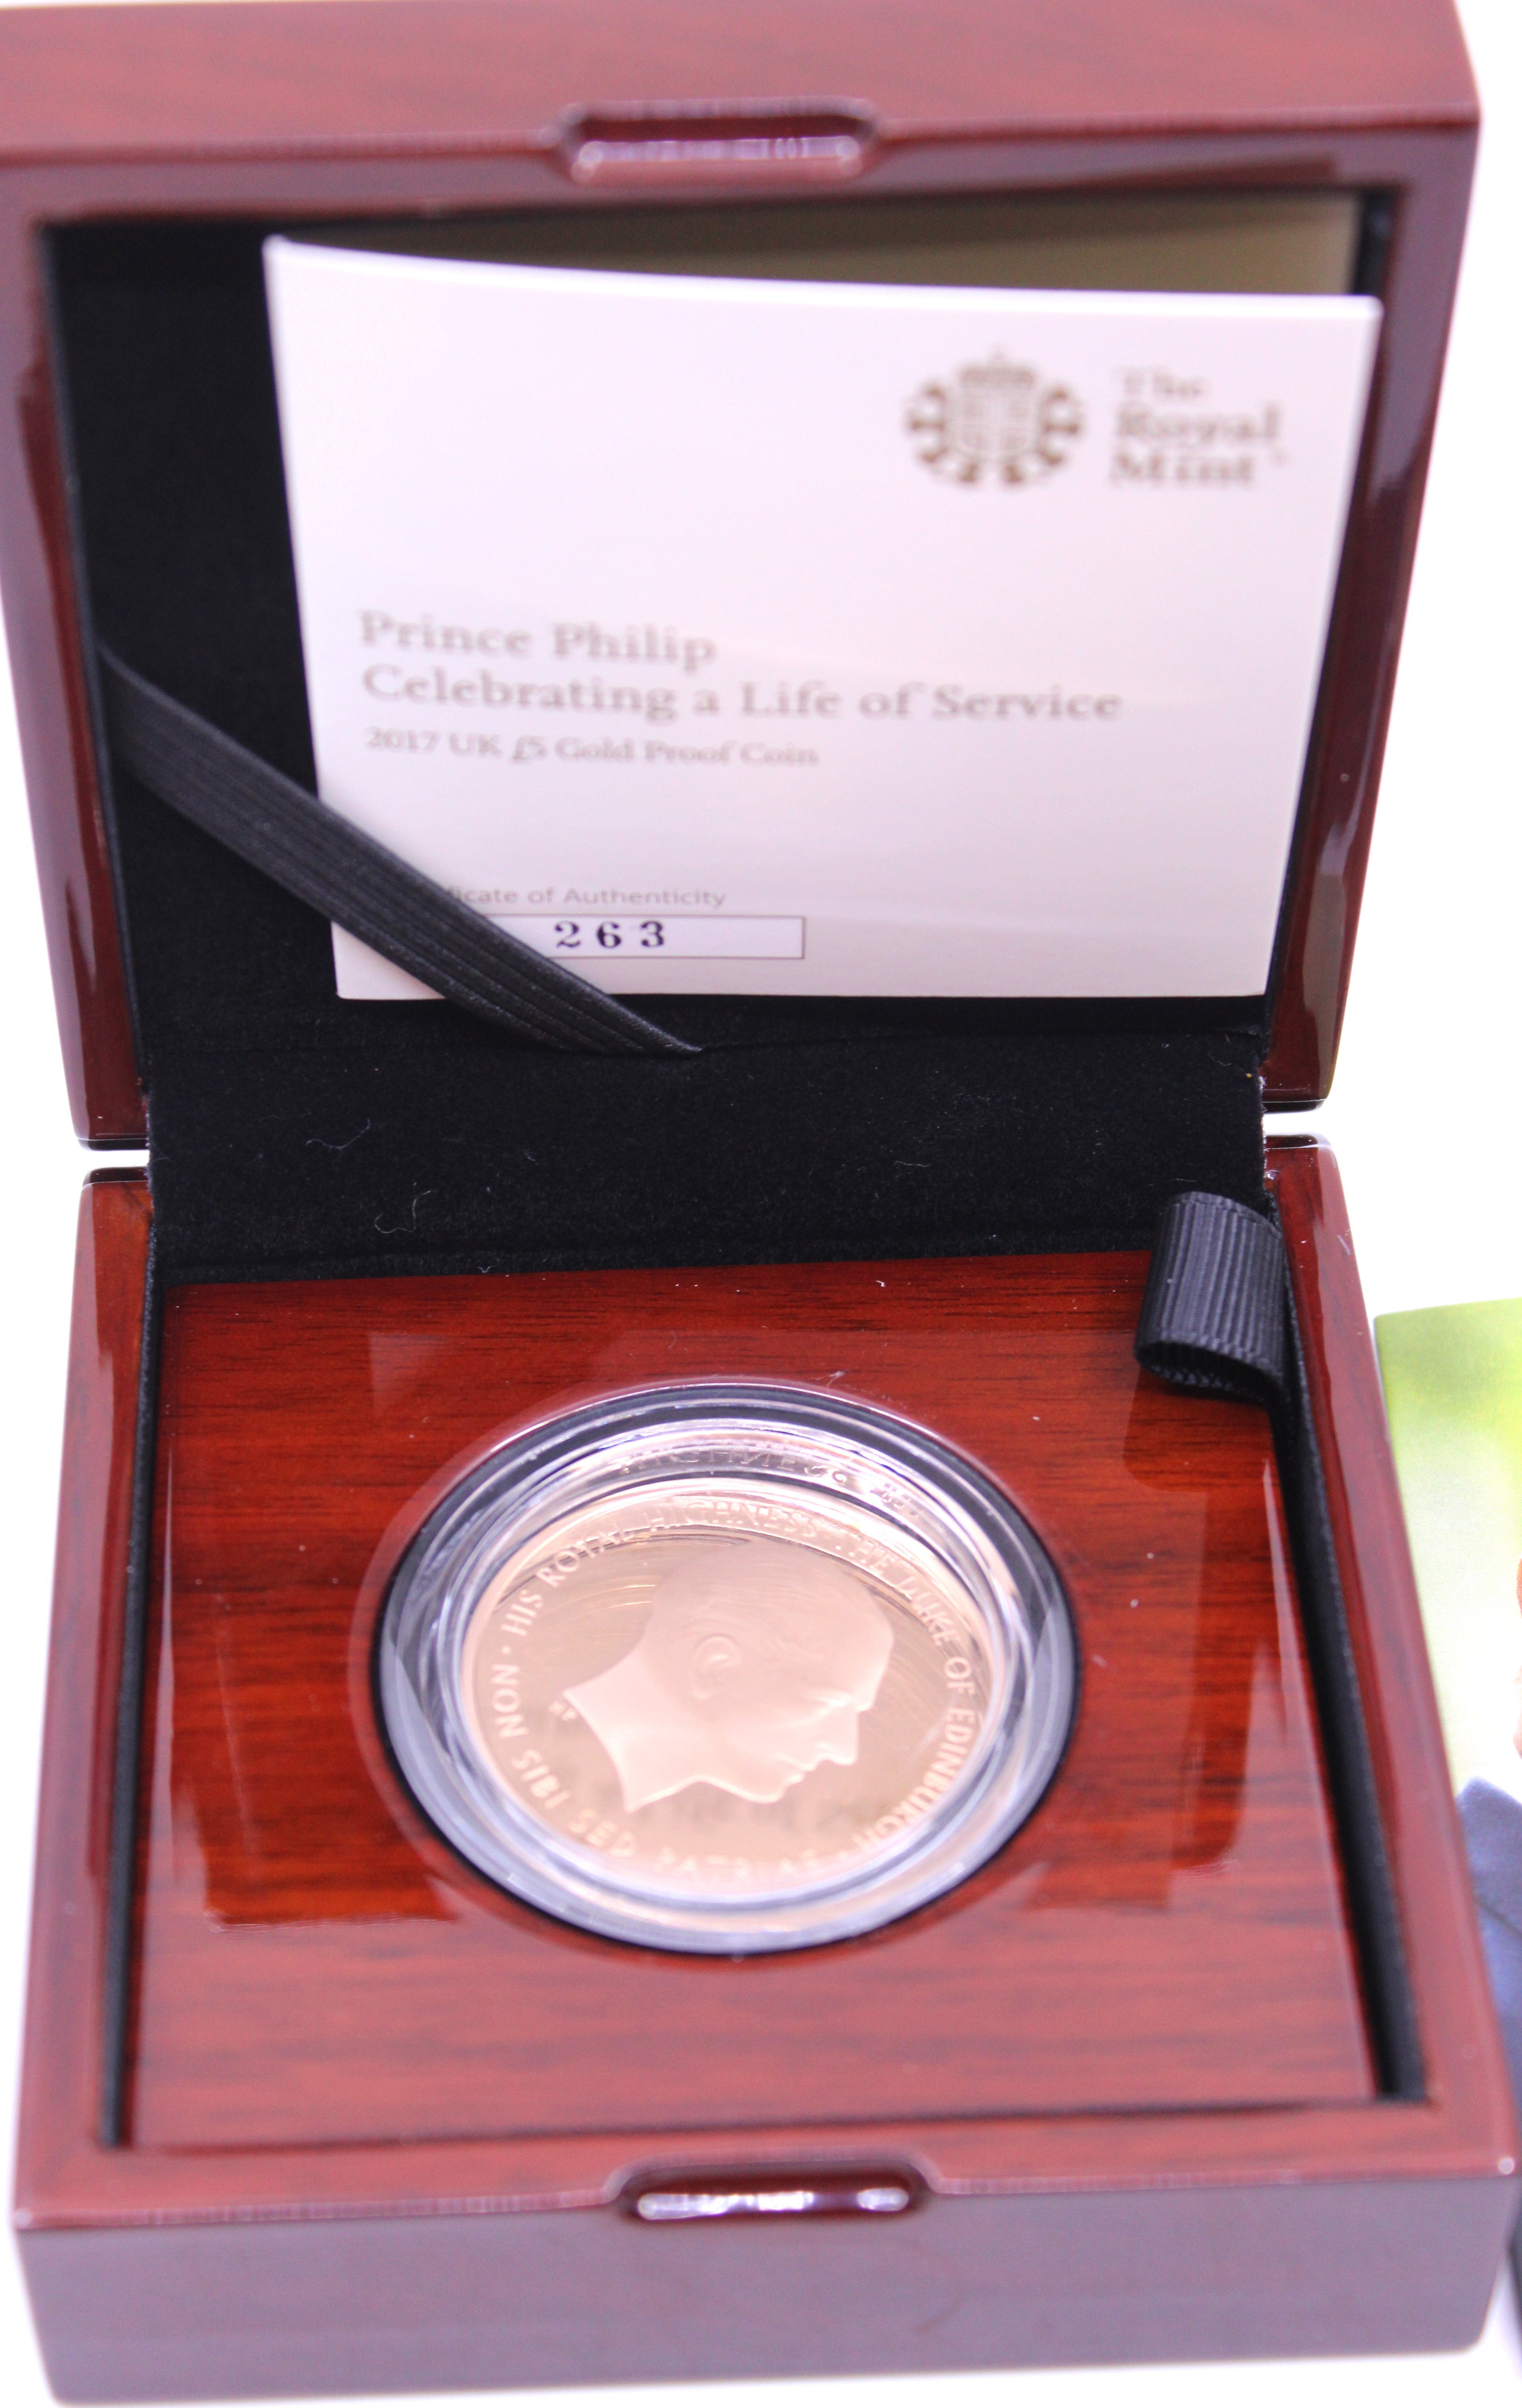 The Royal Mint Prince Philip Celebrating a Life of Service 2017 UK £5 Gold Proof Coin. Boxed with